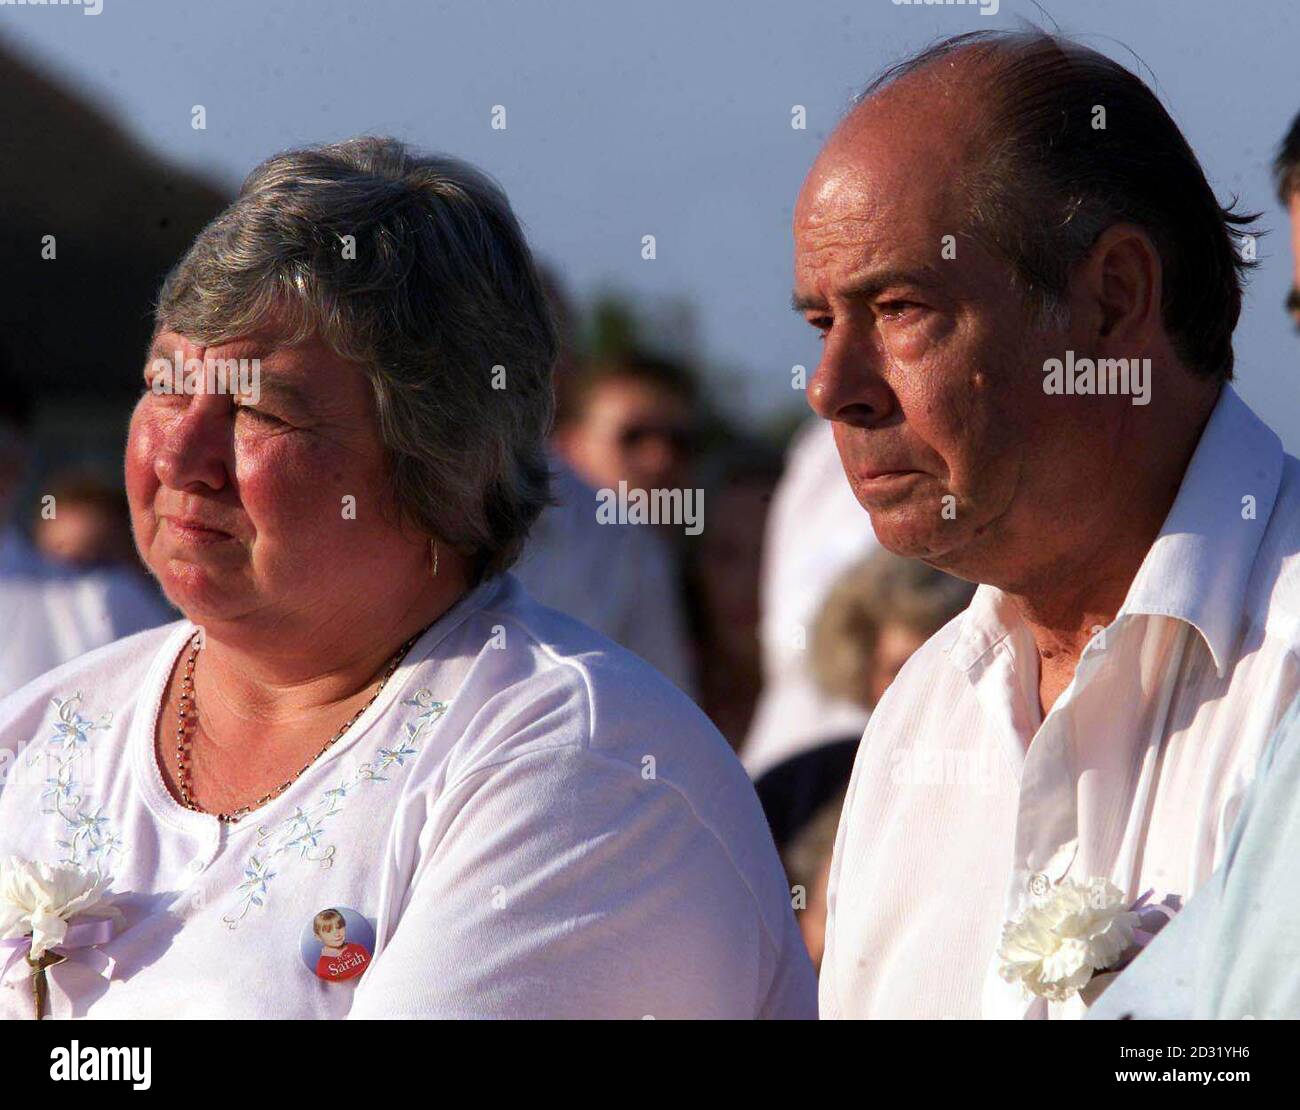 Lesley, (left), and Terry Payne, Grandparents of 10-year-old Sarah Payne  during a service of remembrance at Goring beach, West Sussex, where Sarah, who was abducted and murdered, while playing here a year ago. Stock Photo